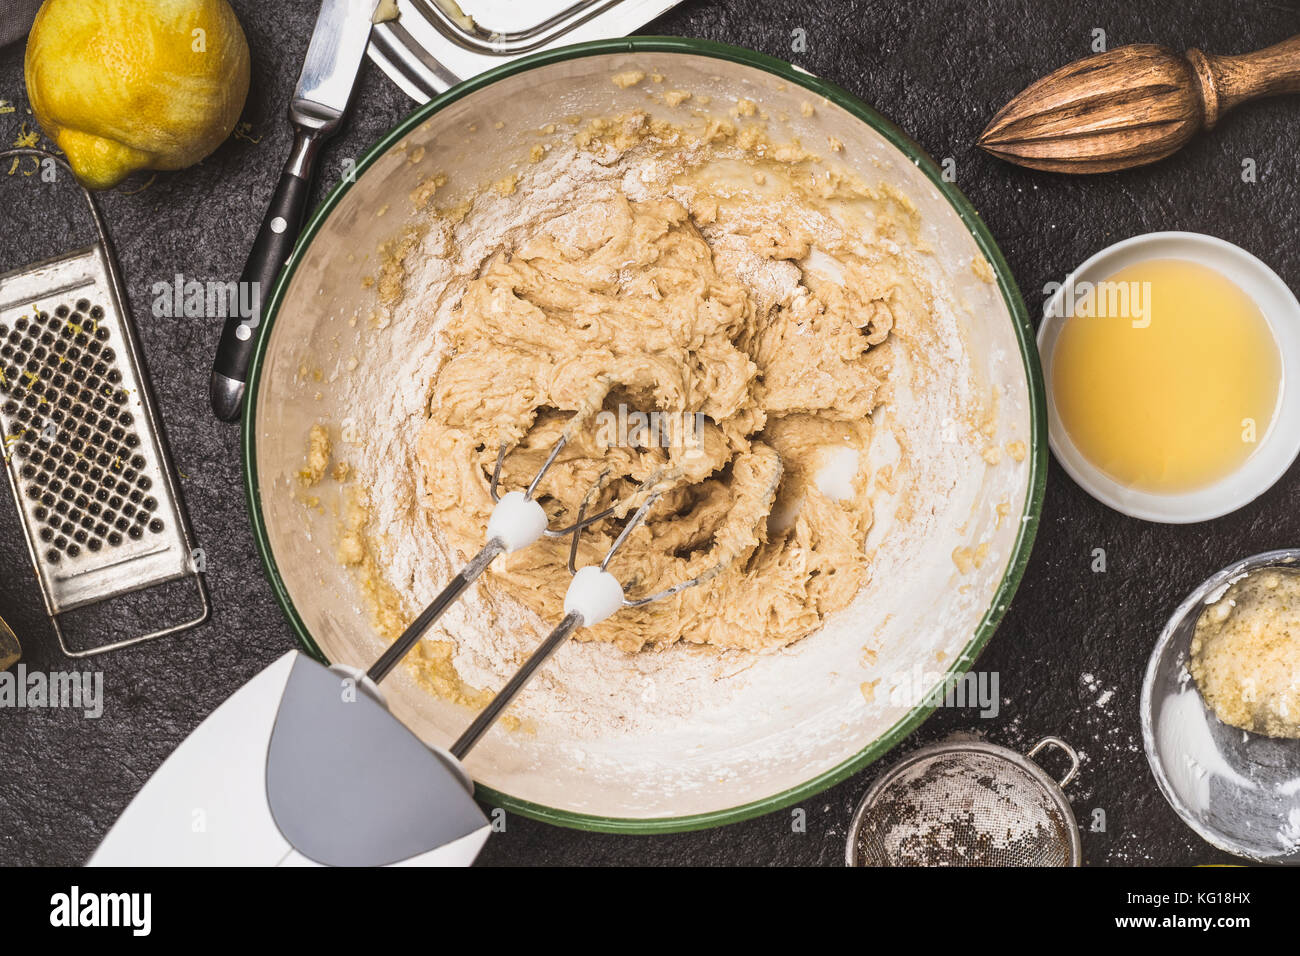 Mixing dough with hand mixer on kitchen table background with cooking ingredients, top view Stock Photo